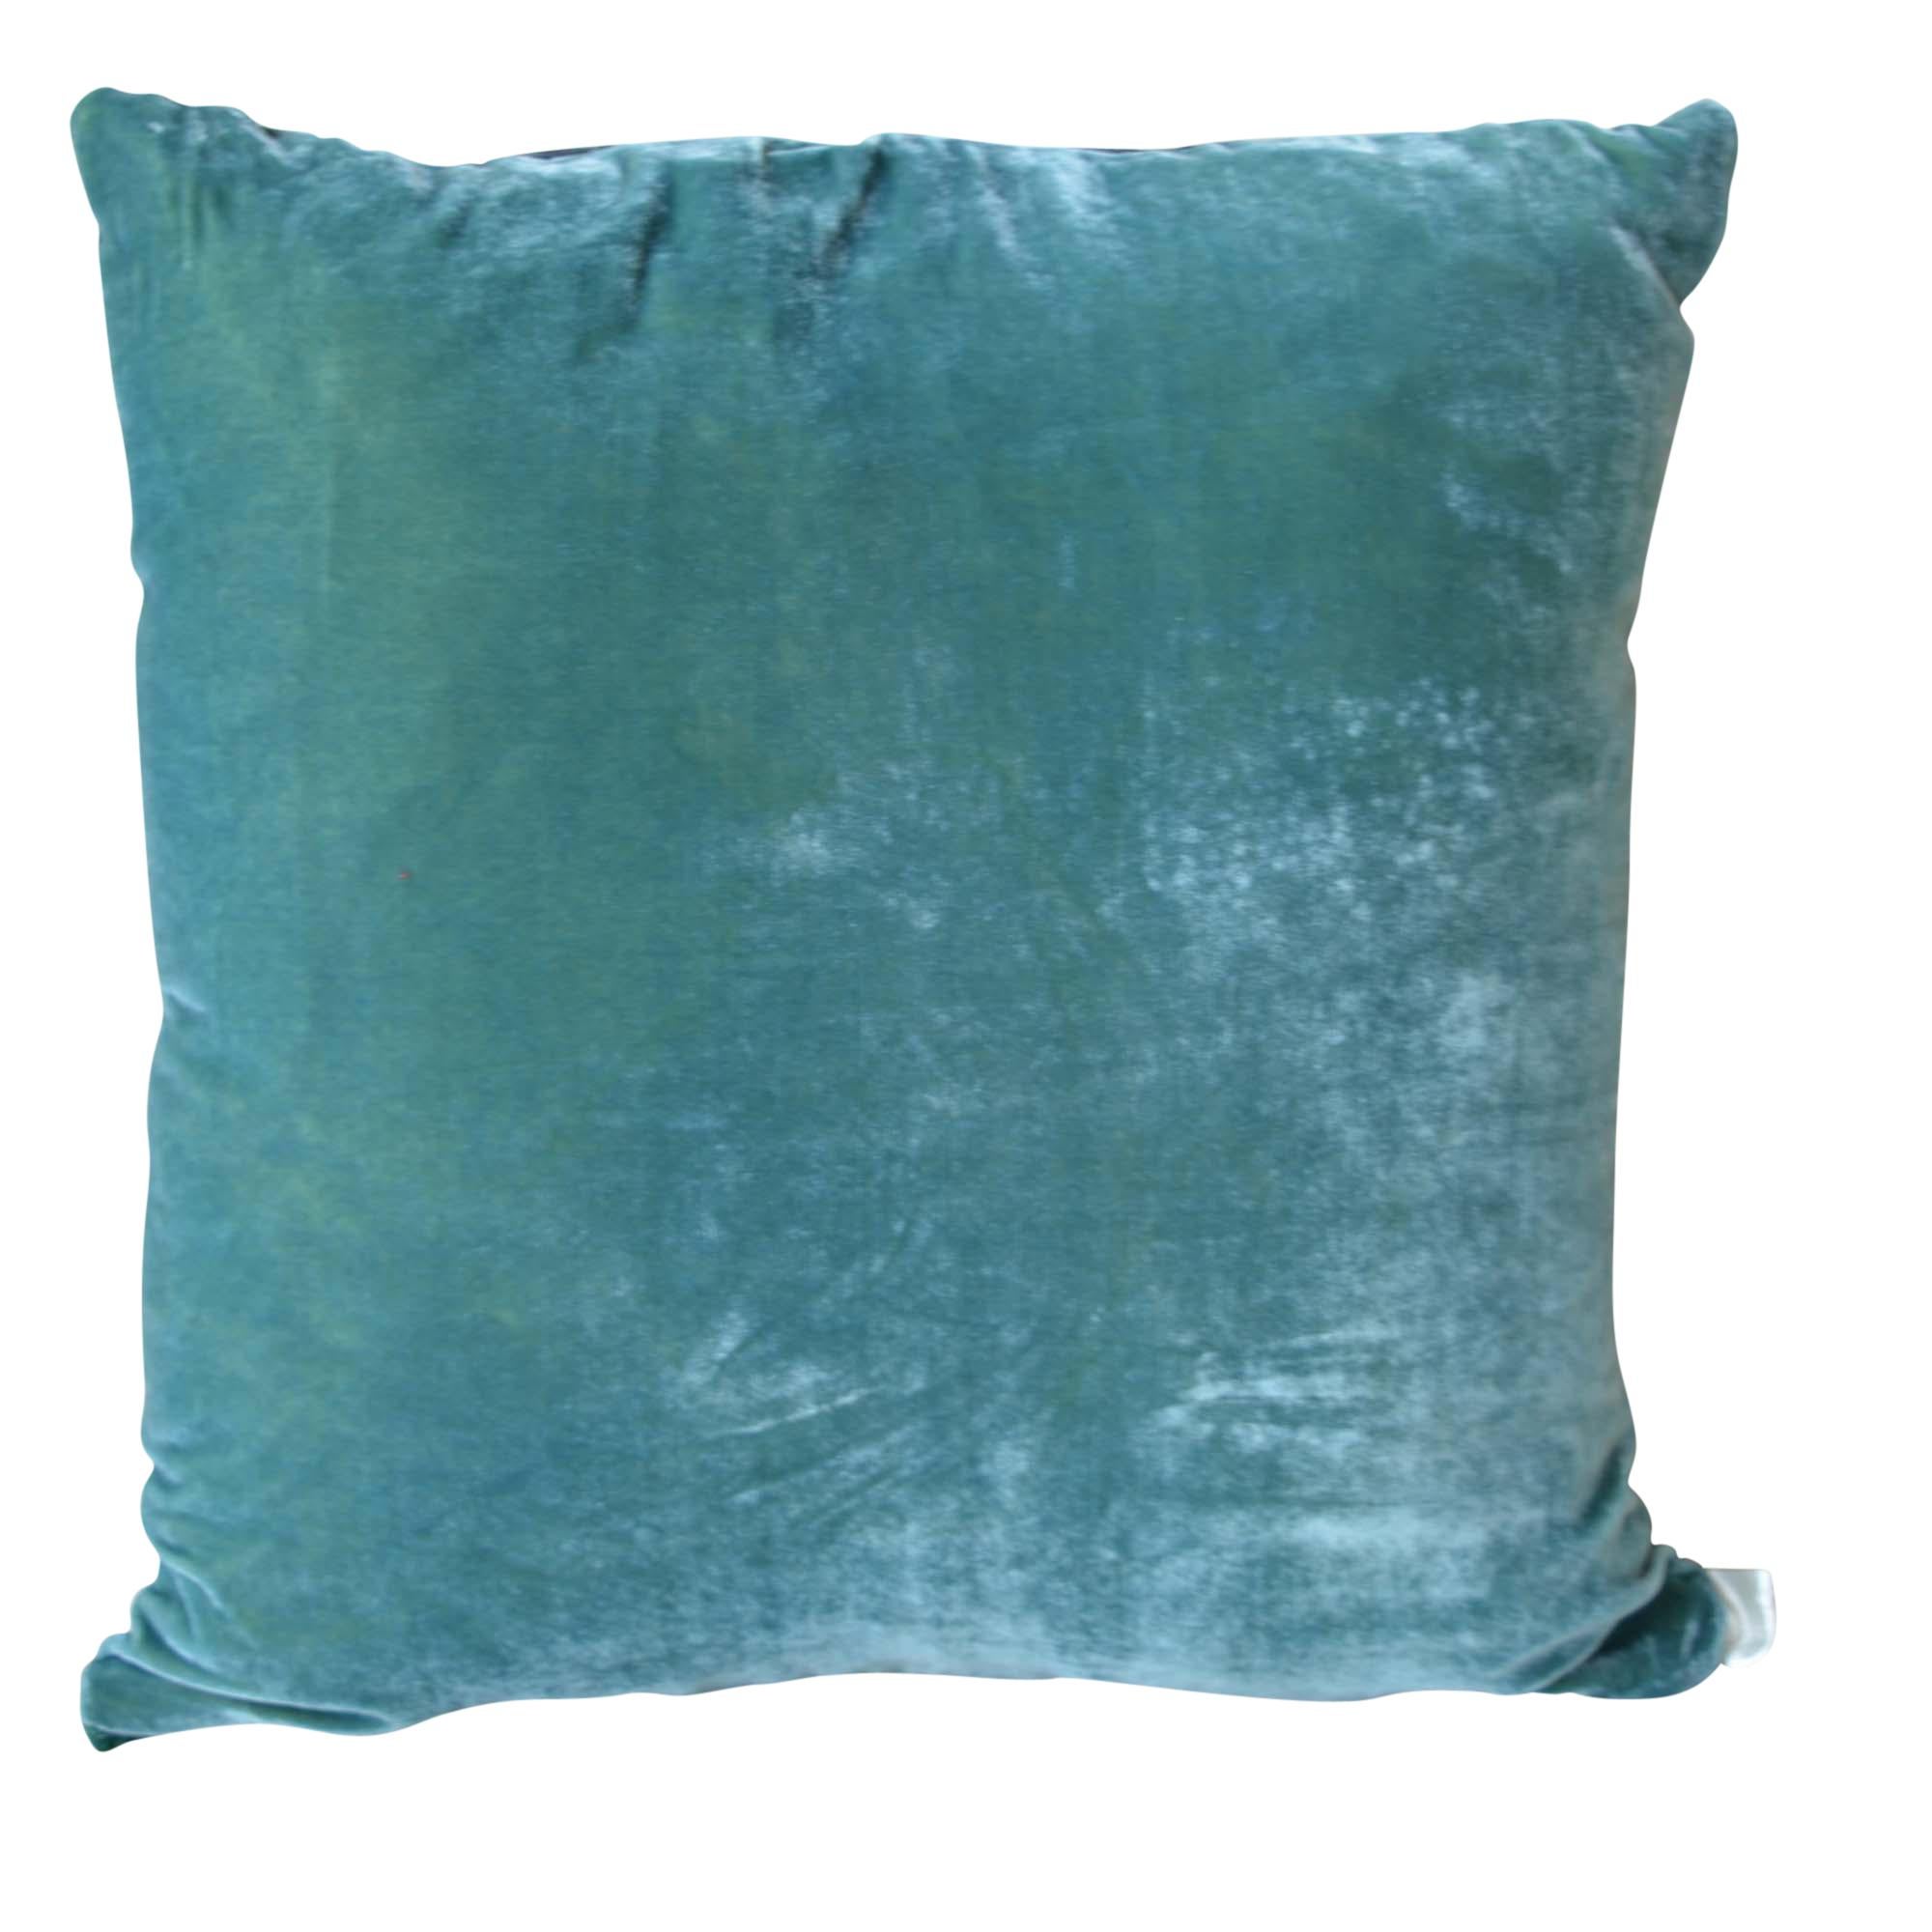 Artisan hand-dyed velvet pillow has a teal Front Design with a coordinating solid back. The new take on the classic grape design was inspired by the artist's walking amongst the vines in the Bordeaux region on holiday. The inserts are filled with